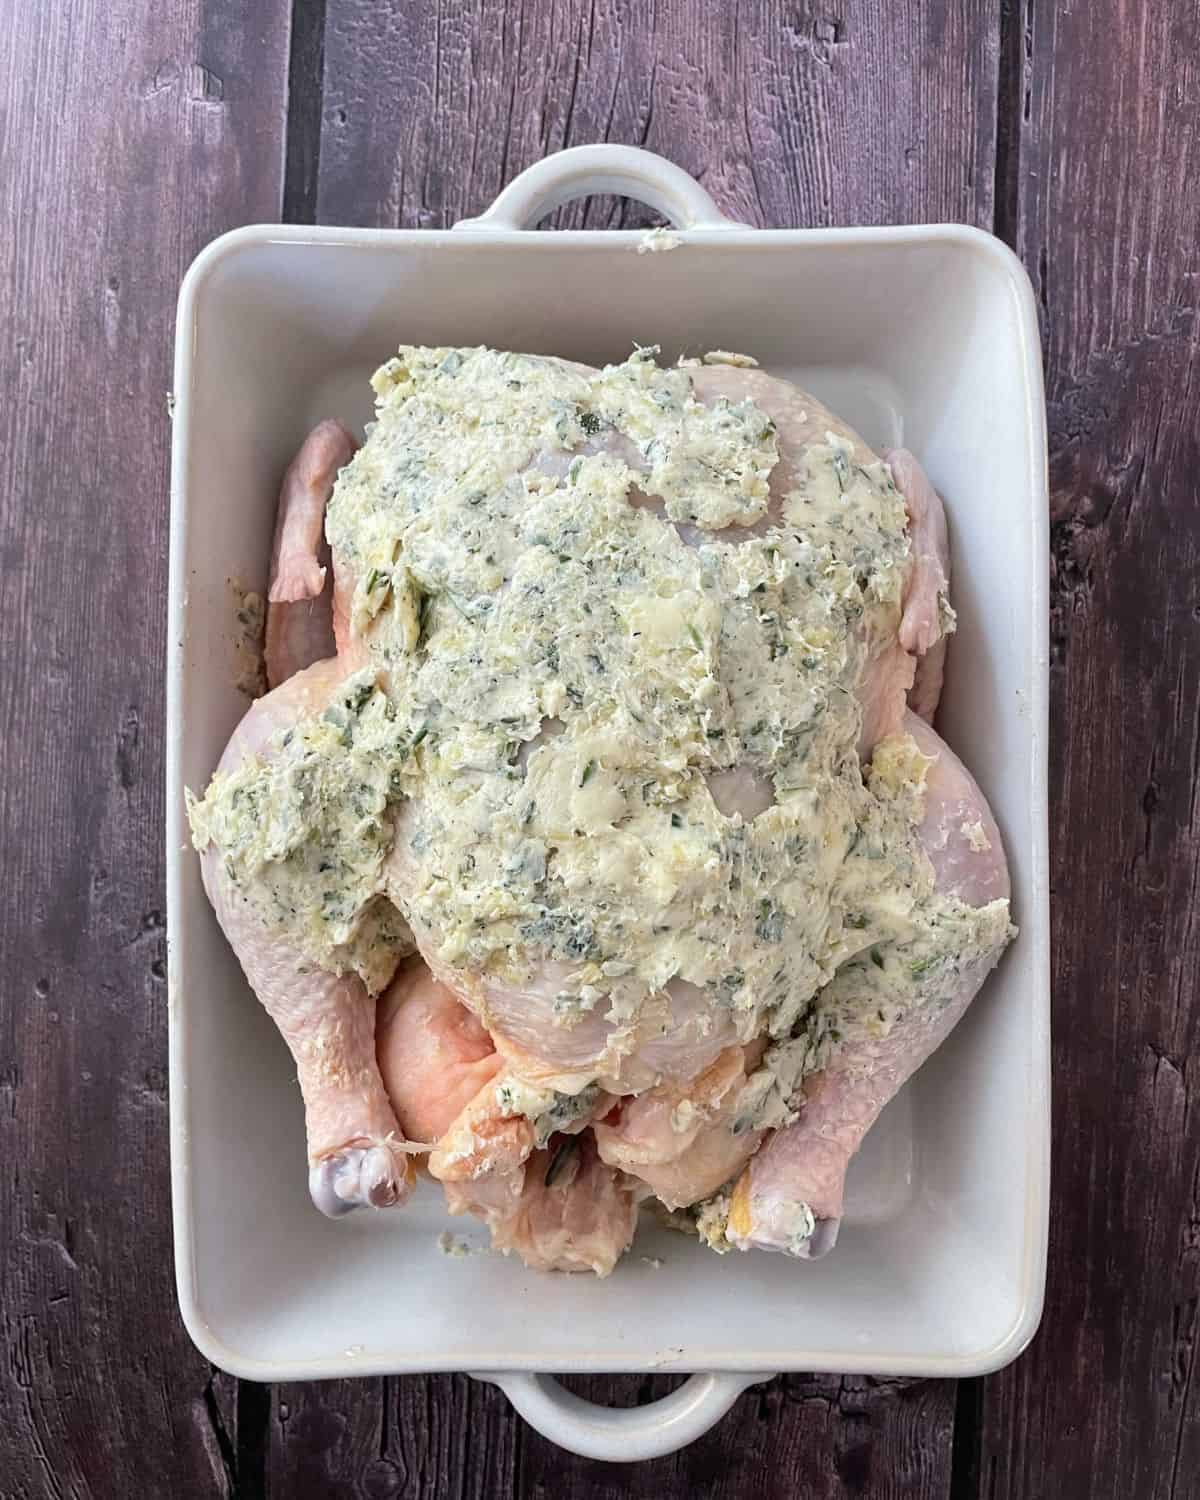 Garlic and herb butter slathered on a raw chicken.